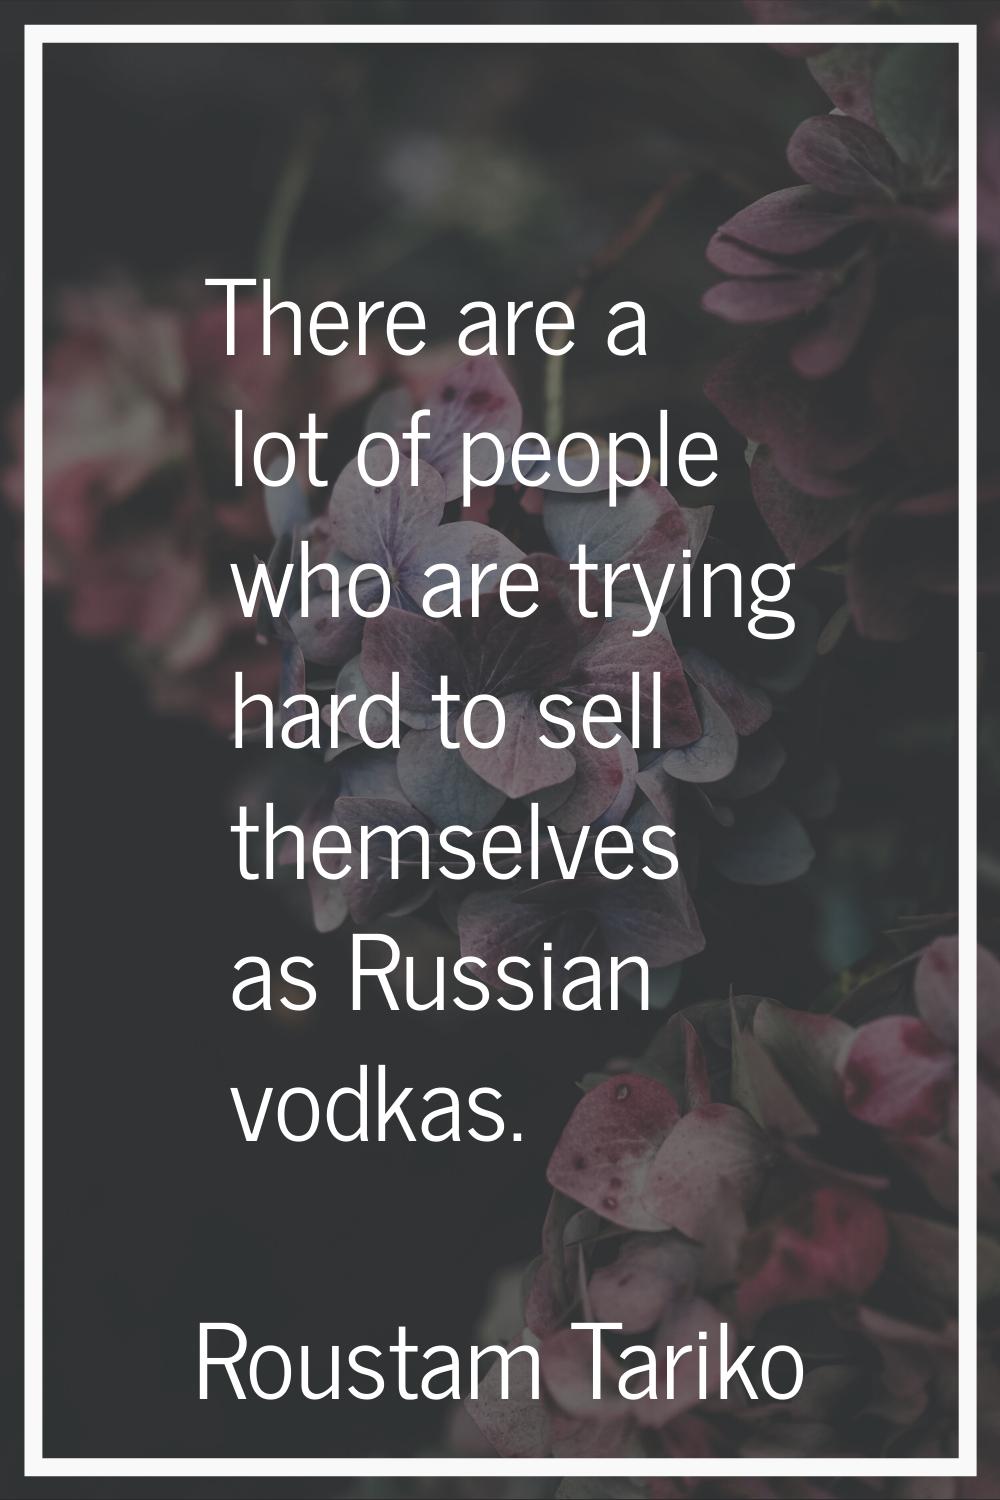 There are a lot of people who are trying hard to sell themselves as Russian vodkas.